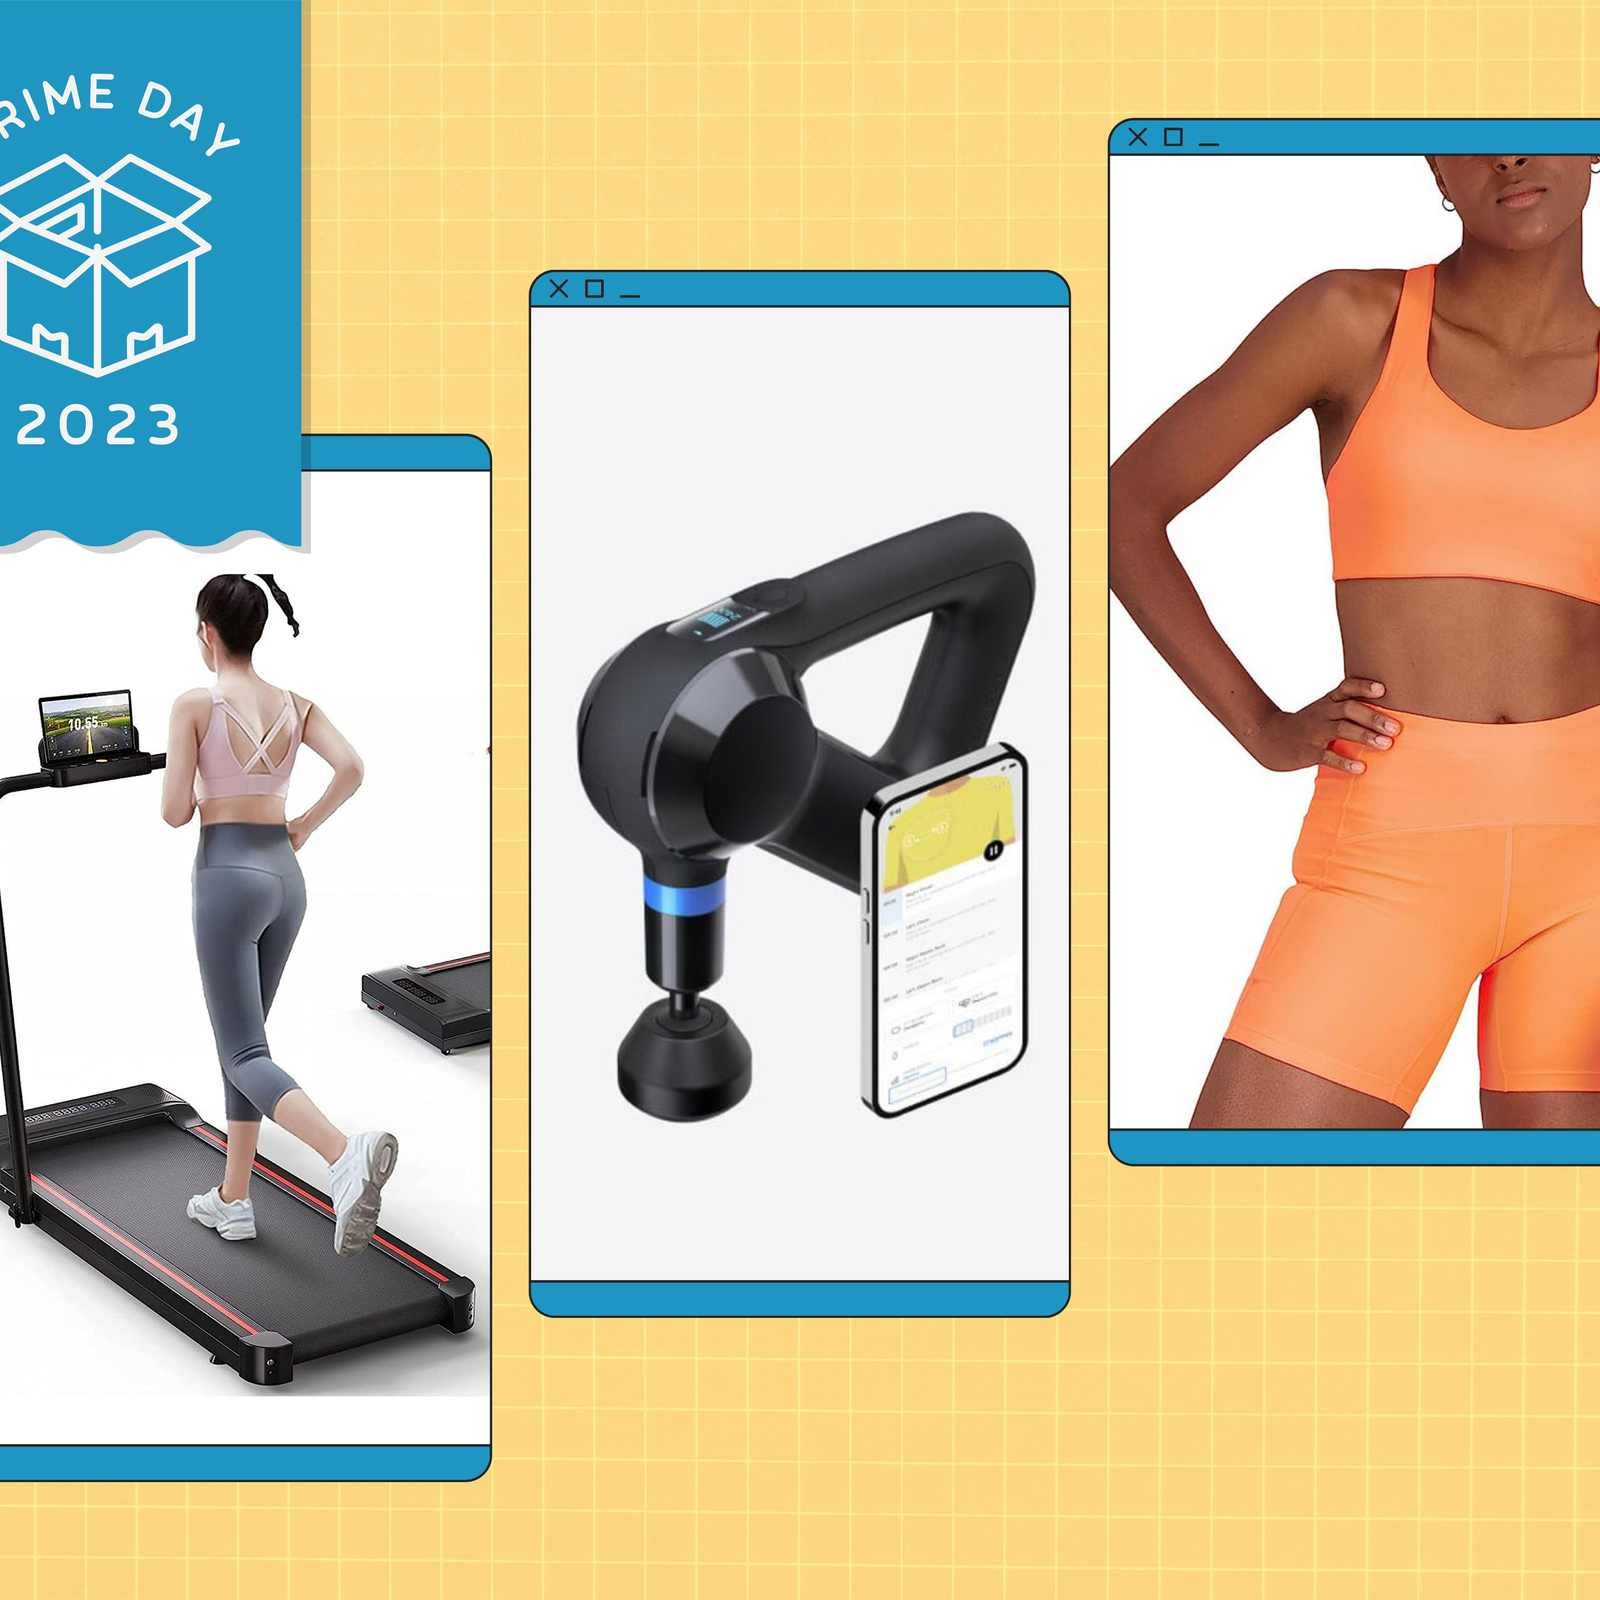 81 Prime Day Fitness Deals You Can Shop Through Today